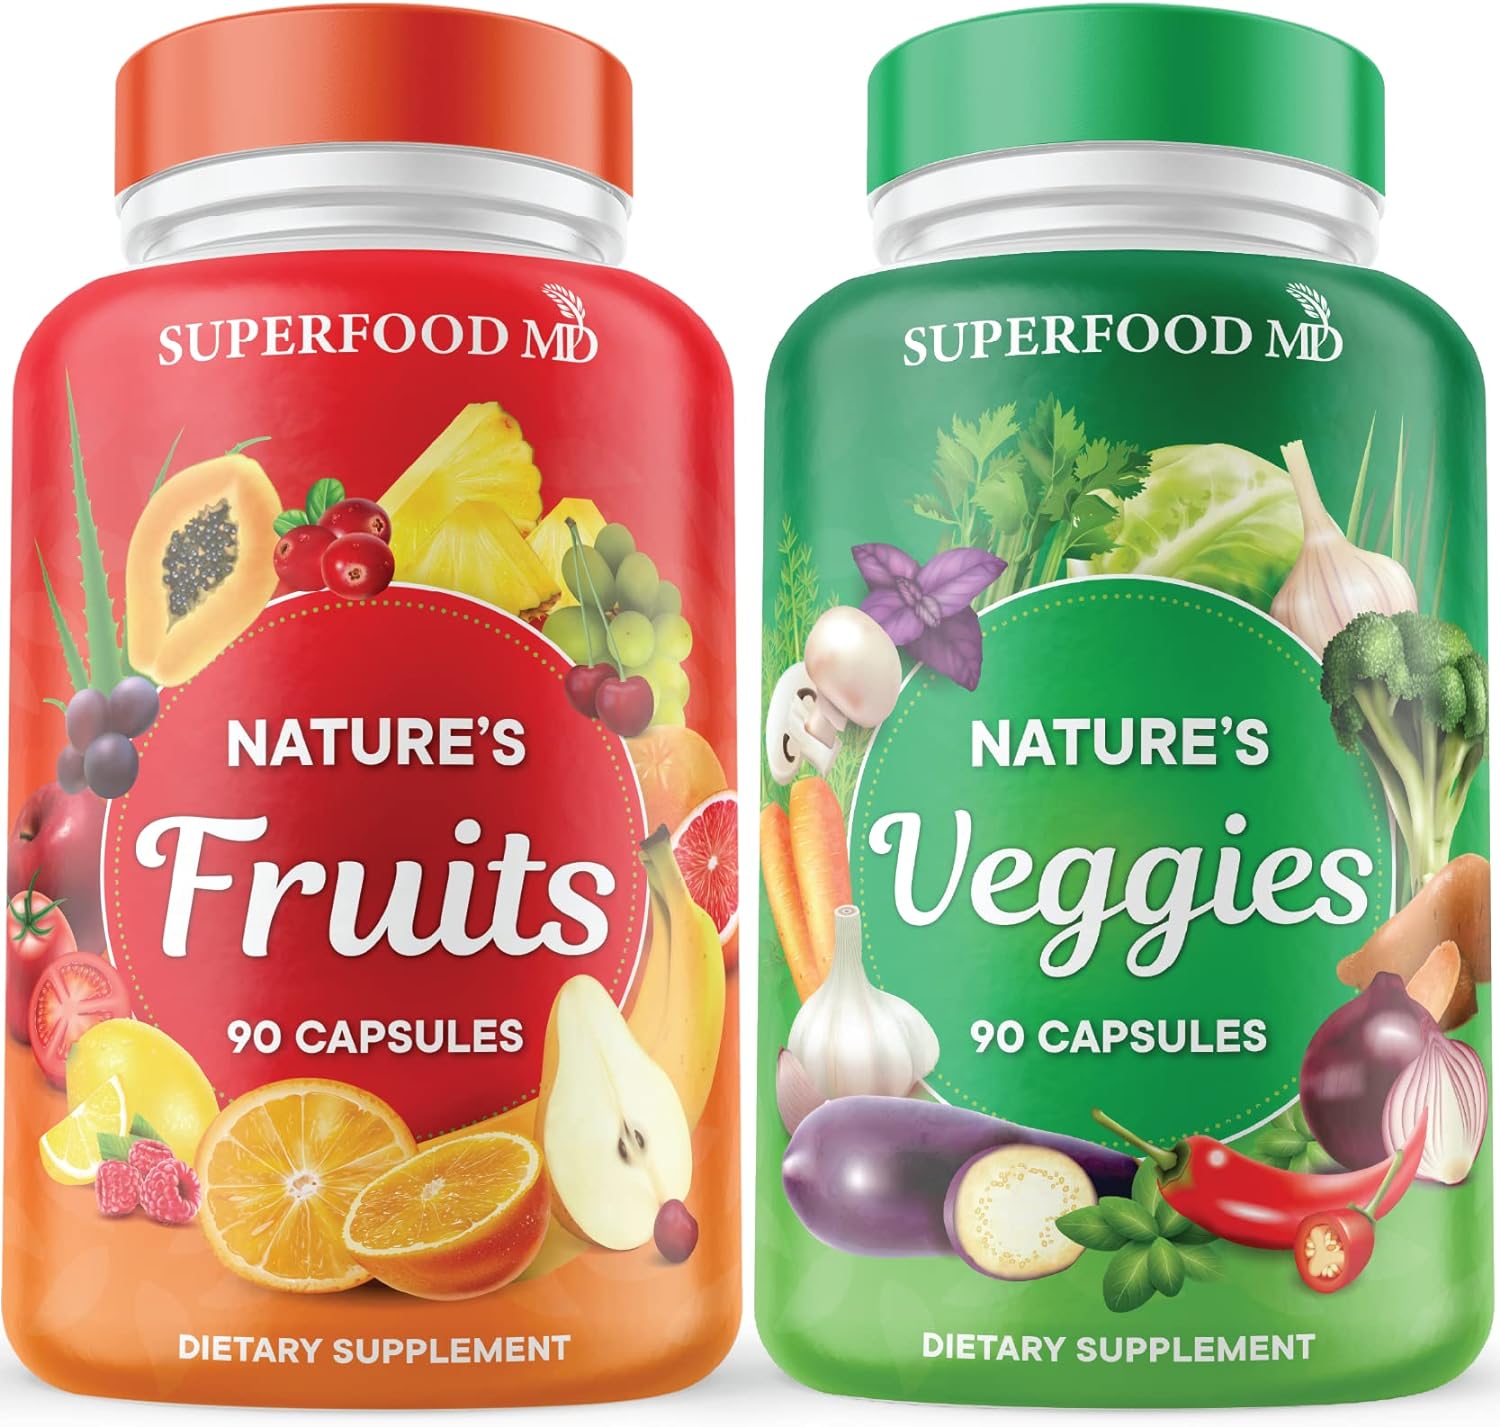 Superfood MD Fruits and Veggies Supplement - 90 Fruit and 90 Veggie Capsules - Supports Energy Levels, High Lycopene, Vitamins & Minerals -Made in The USA - 90 Count (Pack of 2)